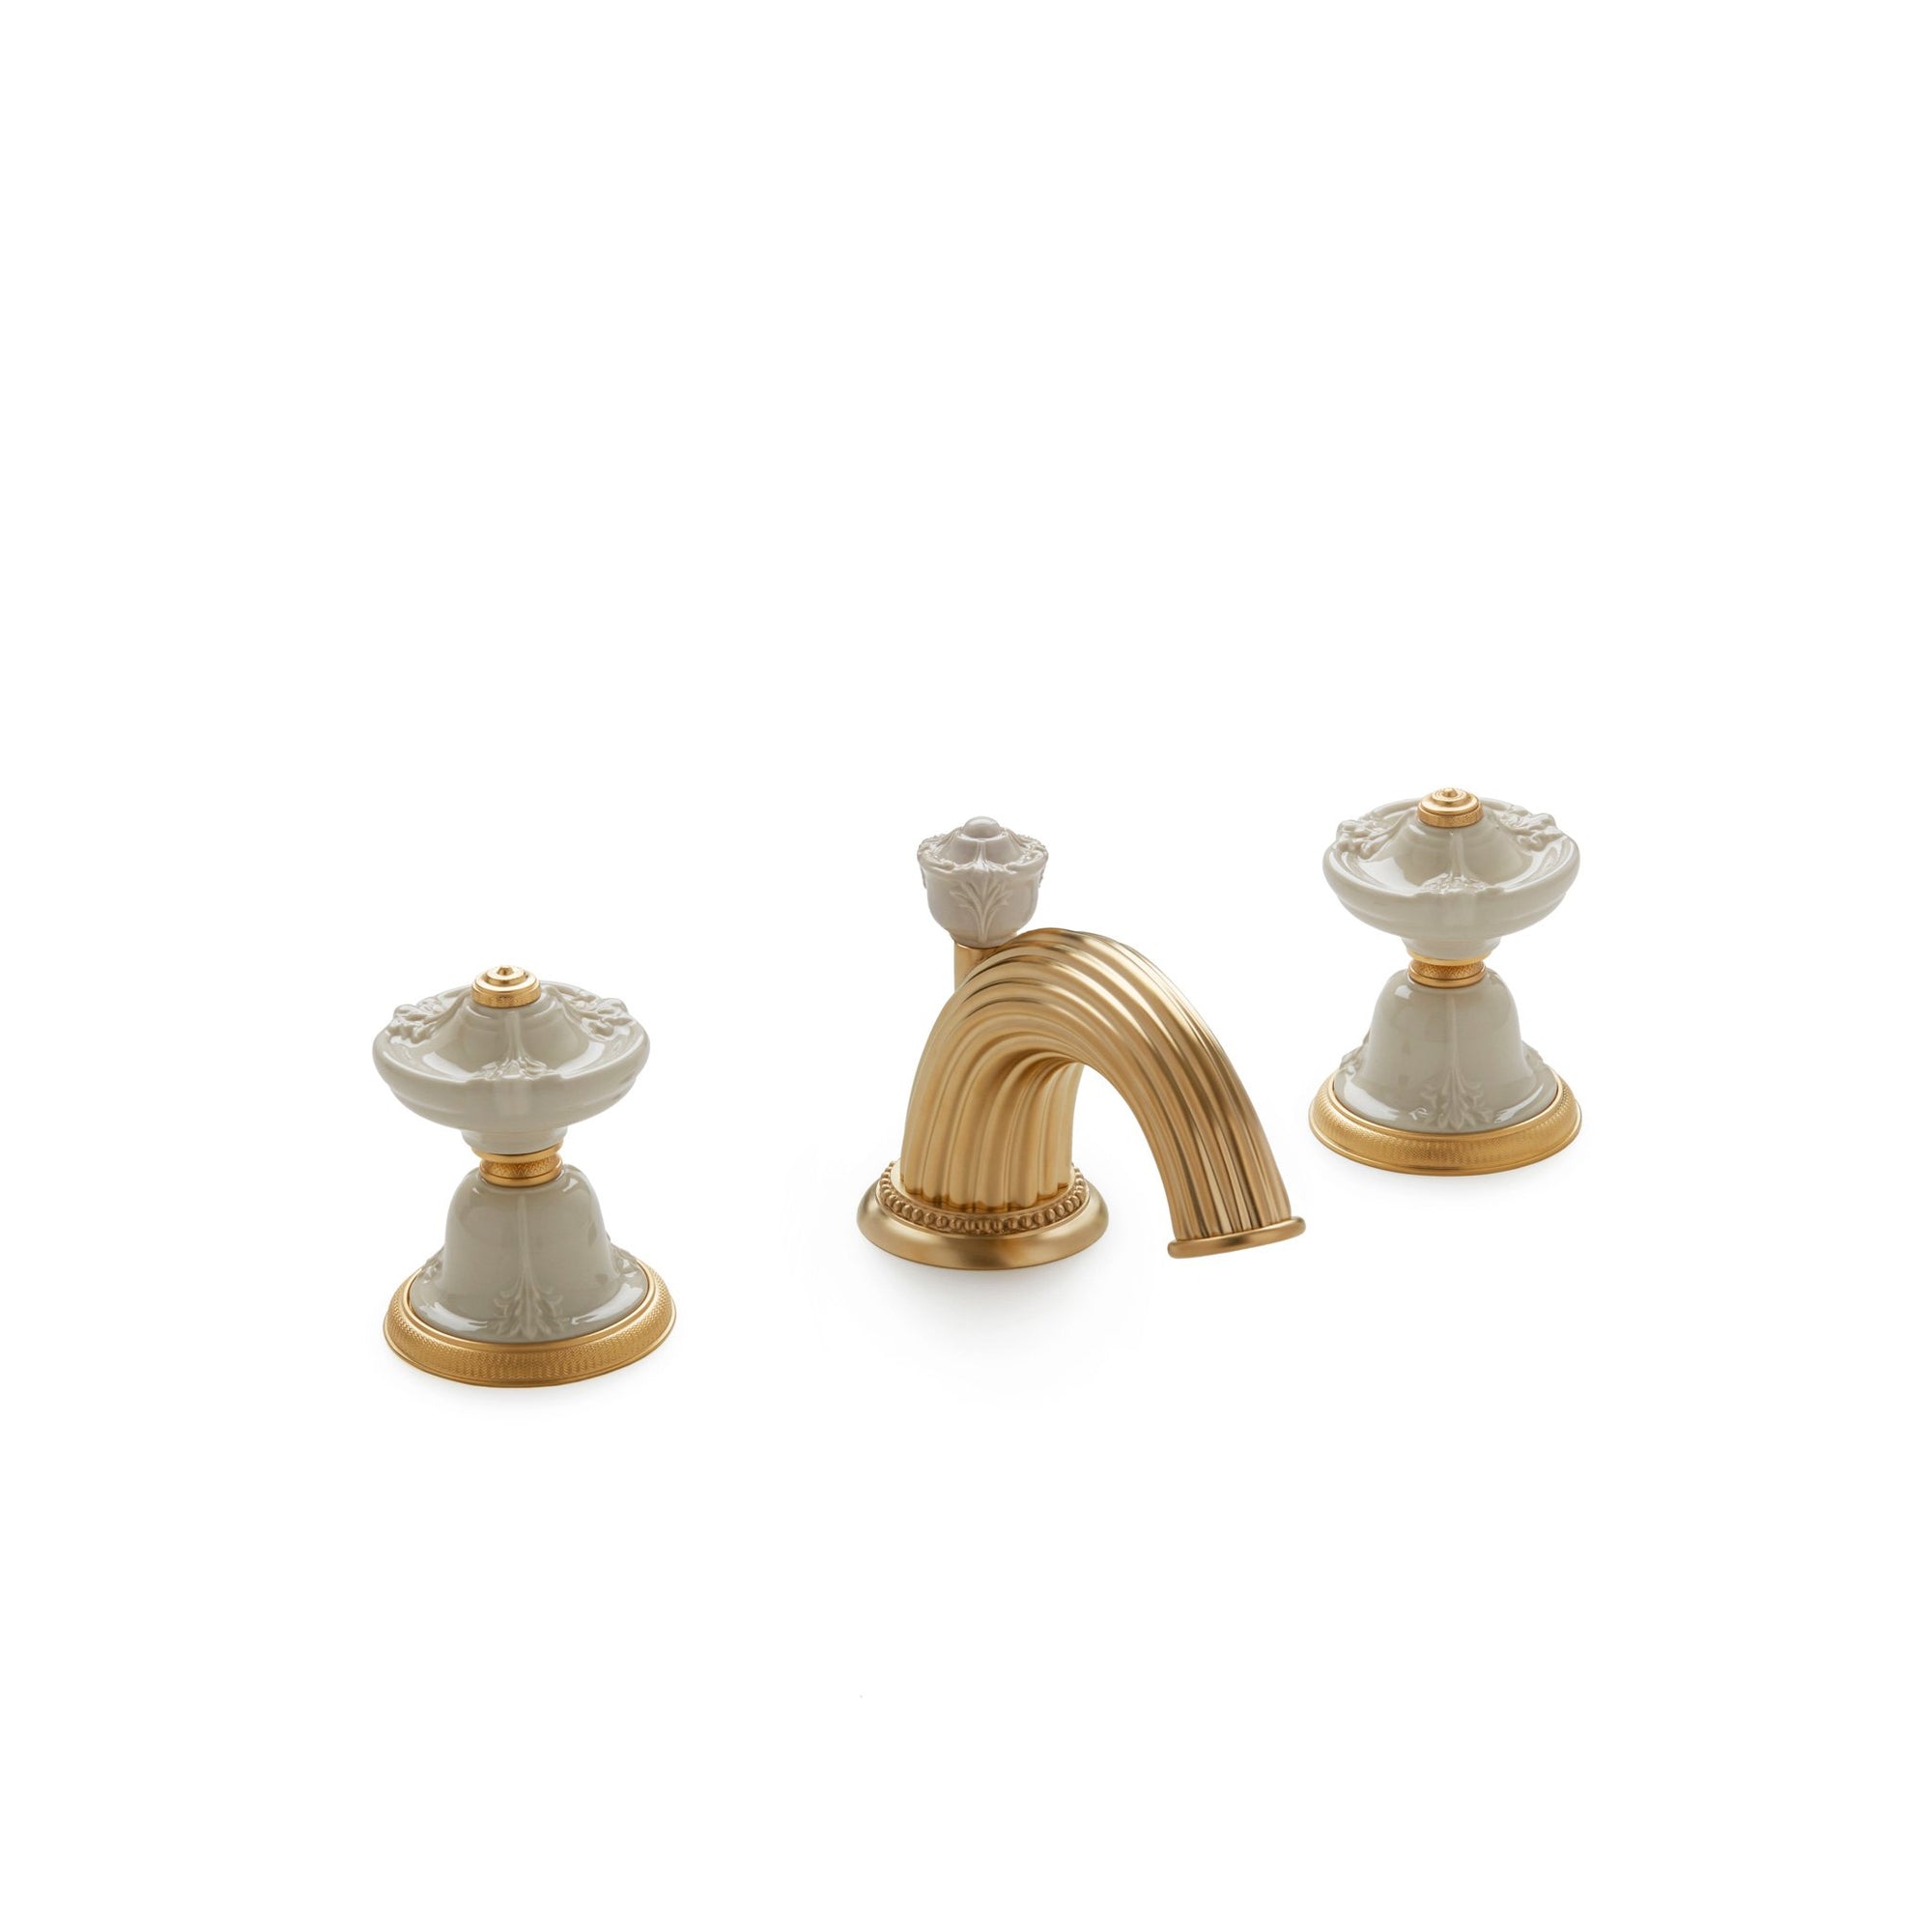 1097BSN813-04SD-GP Sherle Wagner International Provence Ceramic Knob Faucet Set in Gold Plate metal finish with Sand Glaze inserts